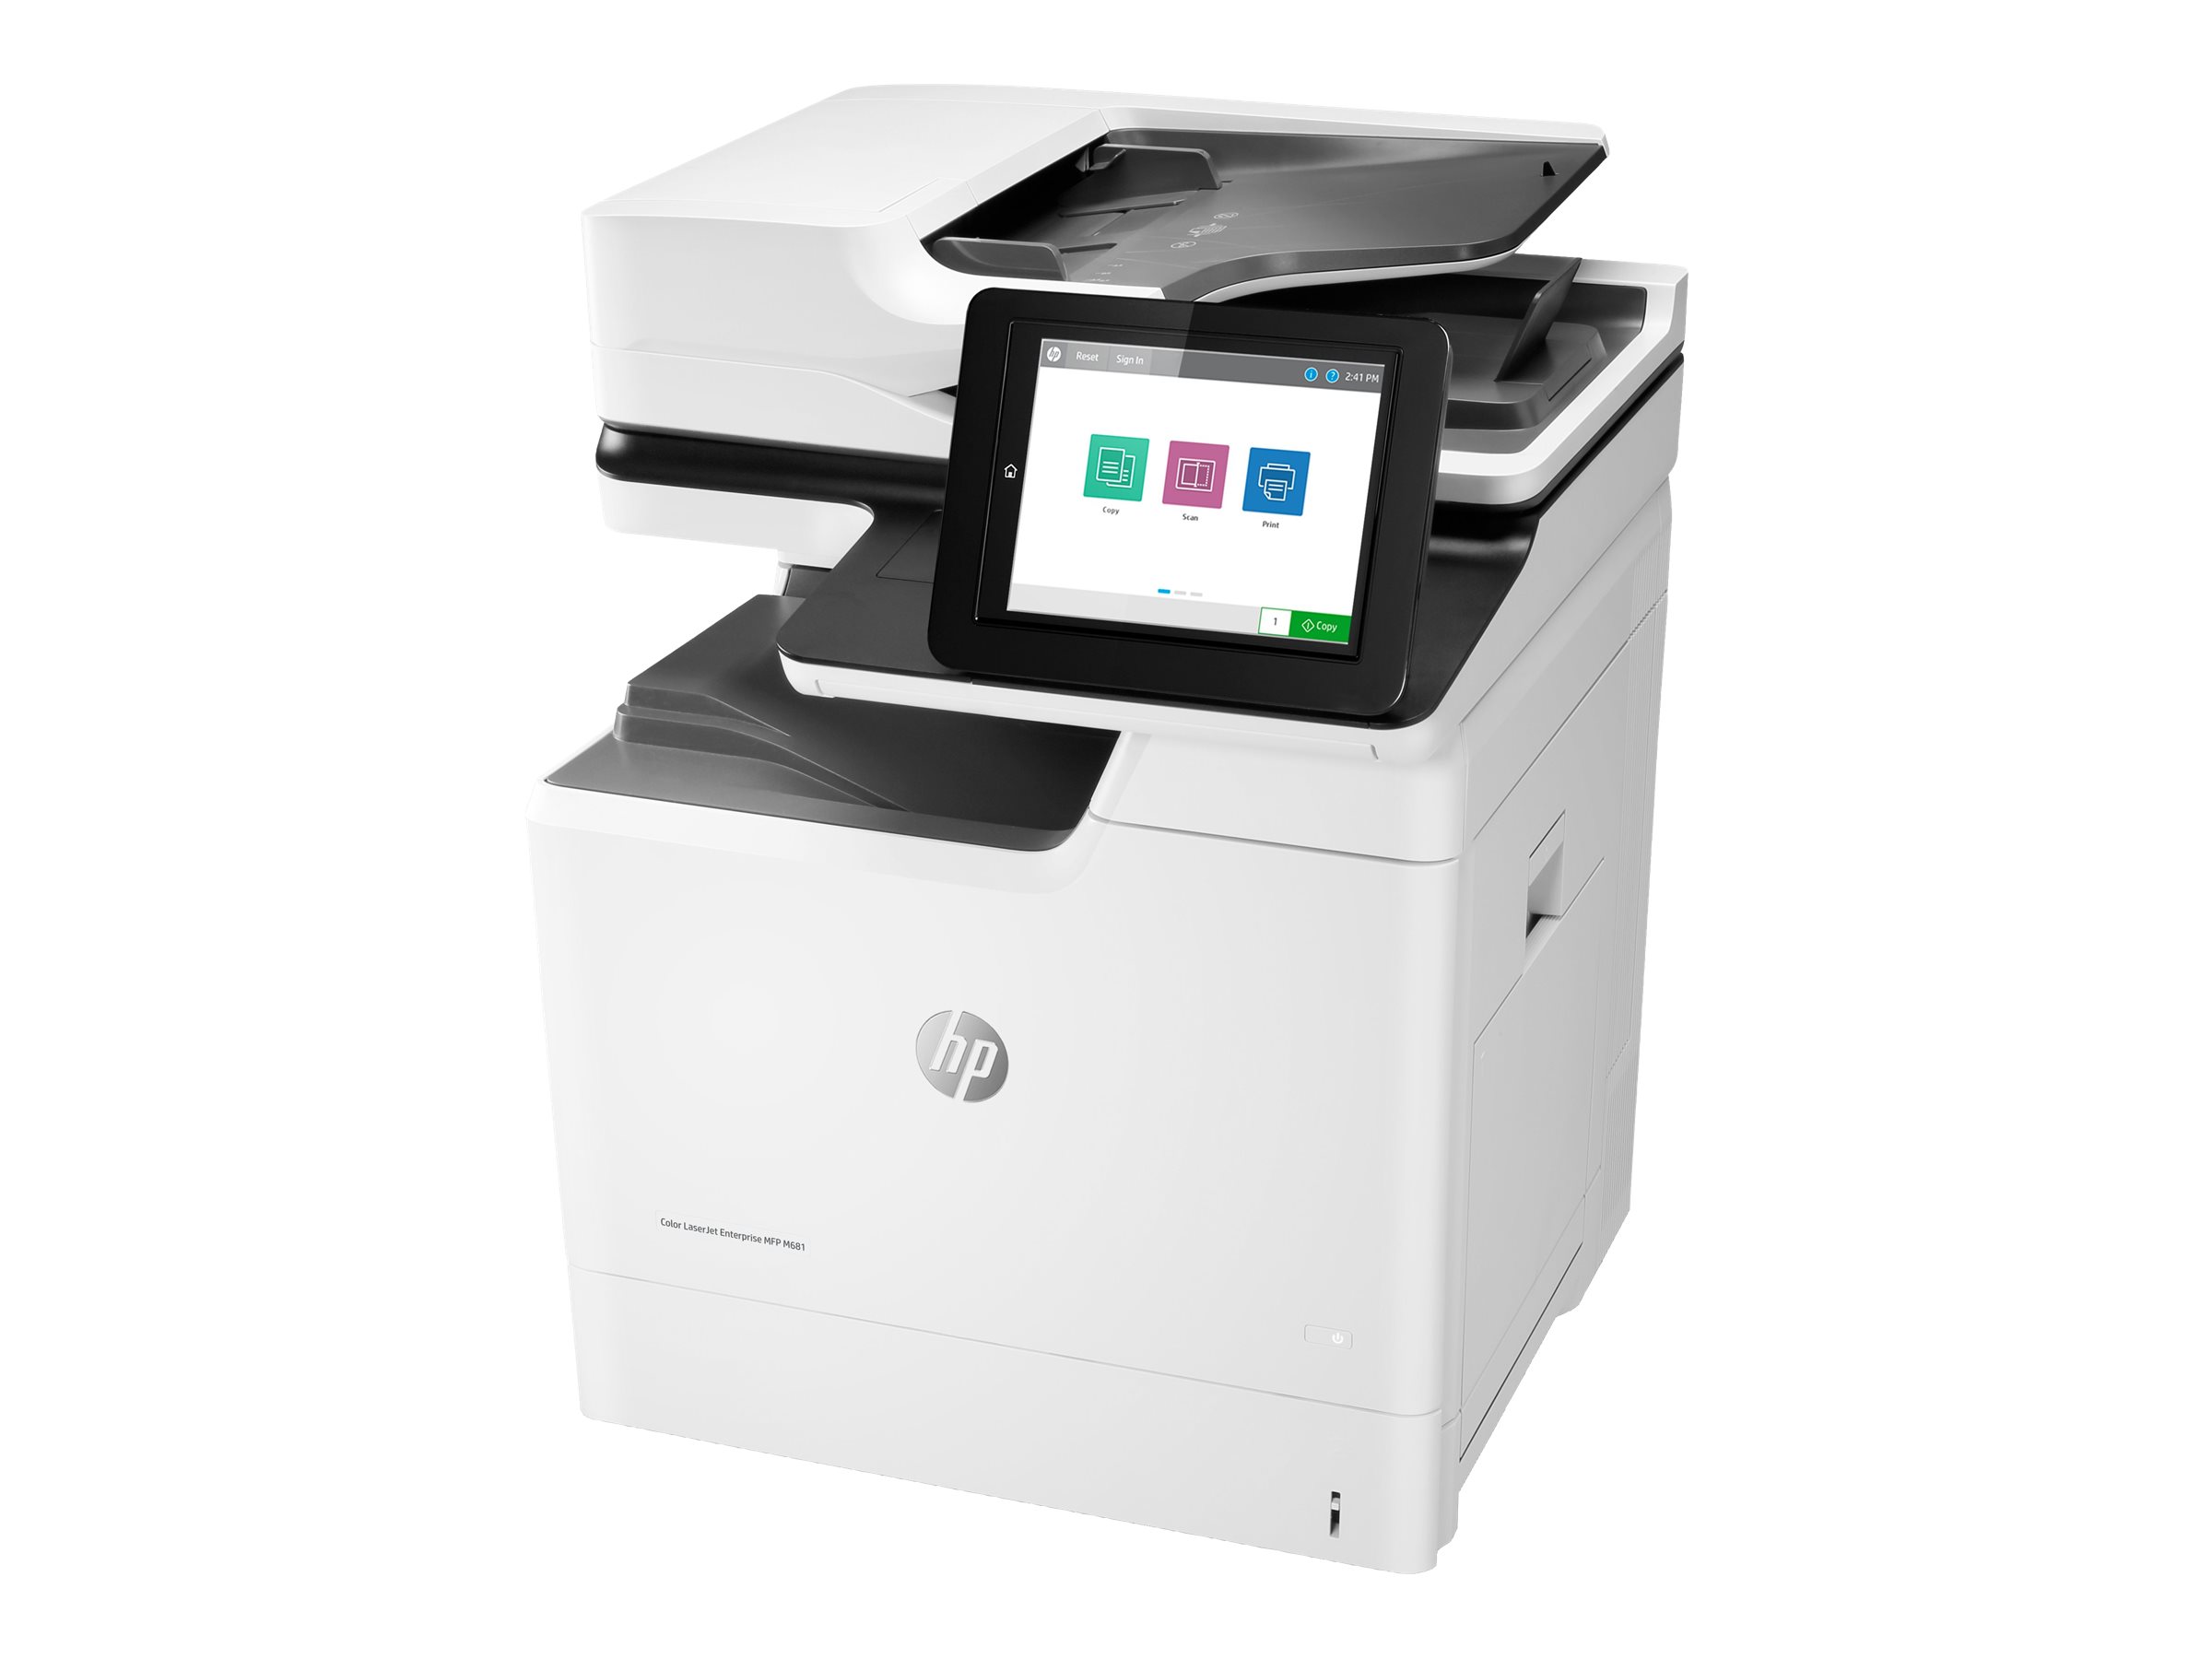 PageWide Managed Color MFP P77440 Printer series